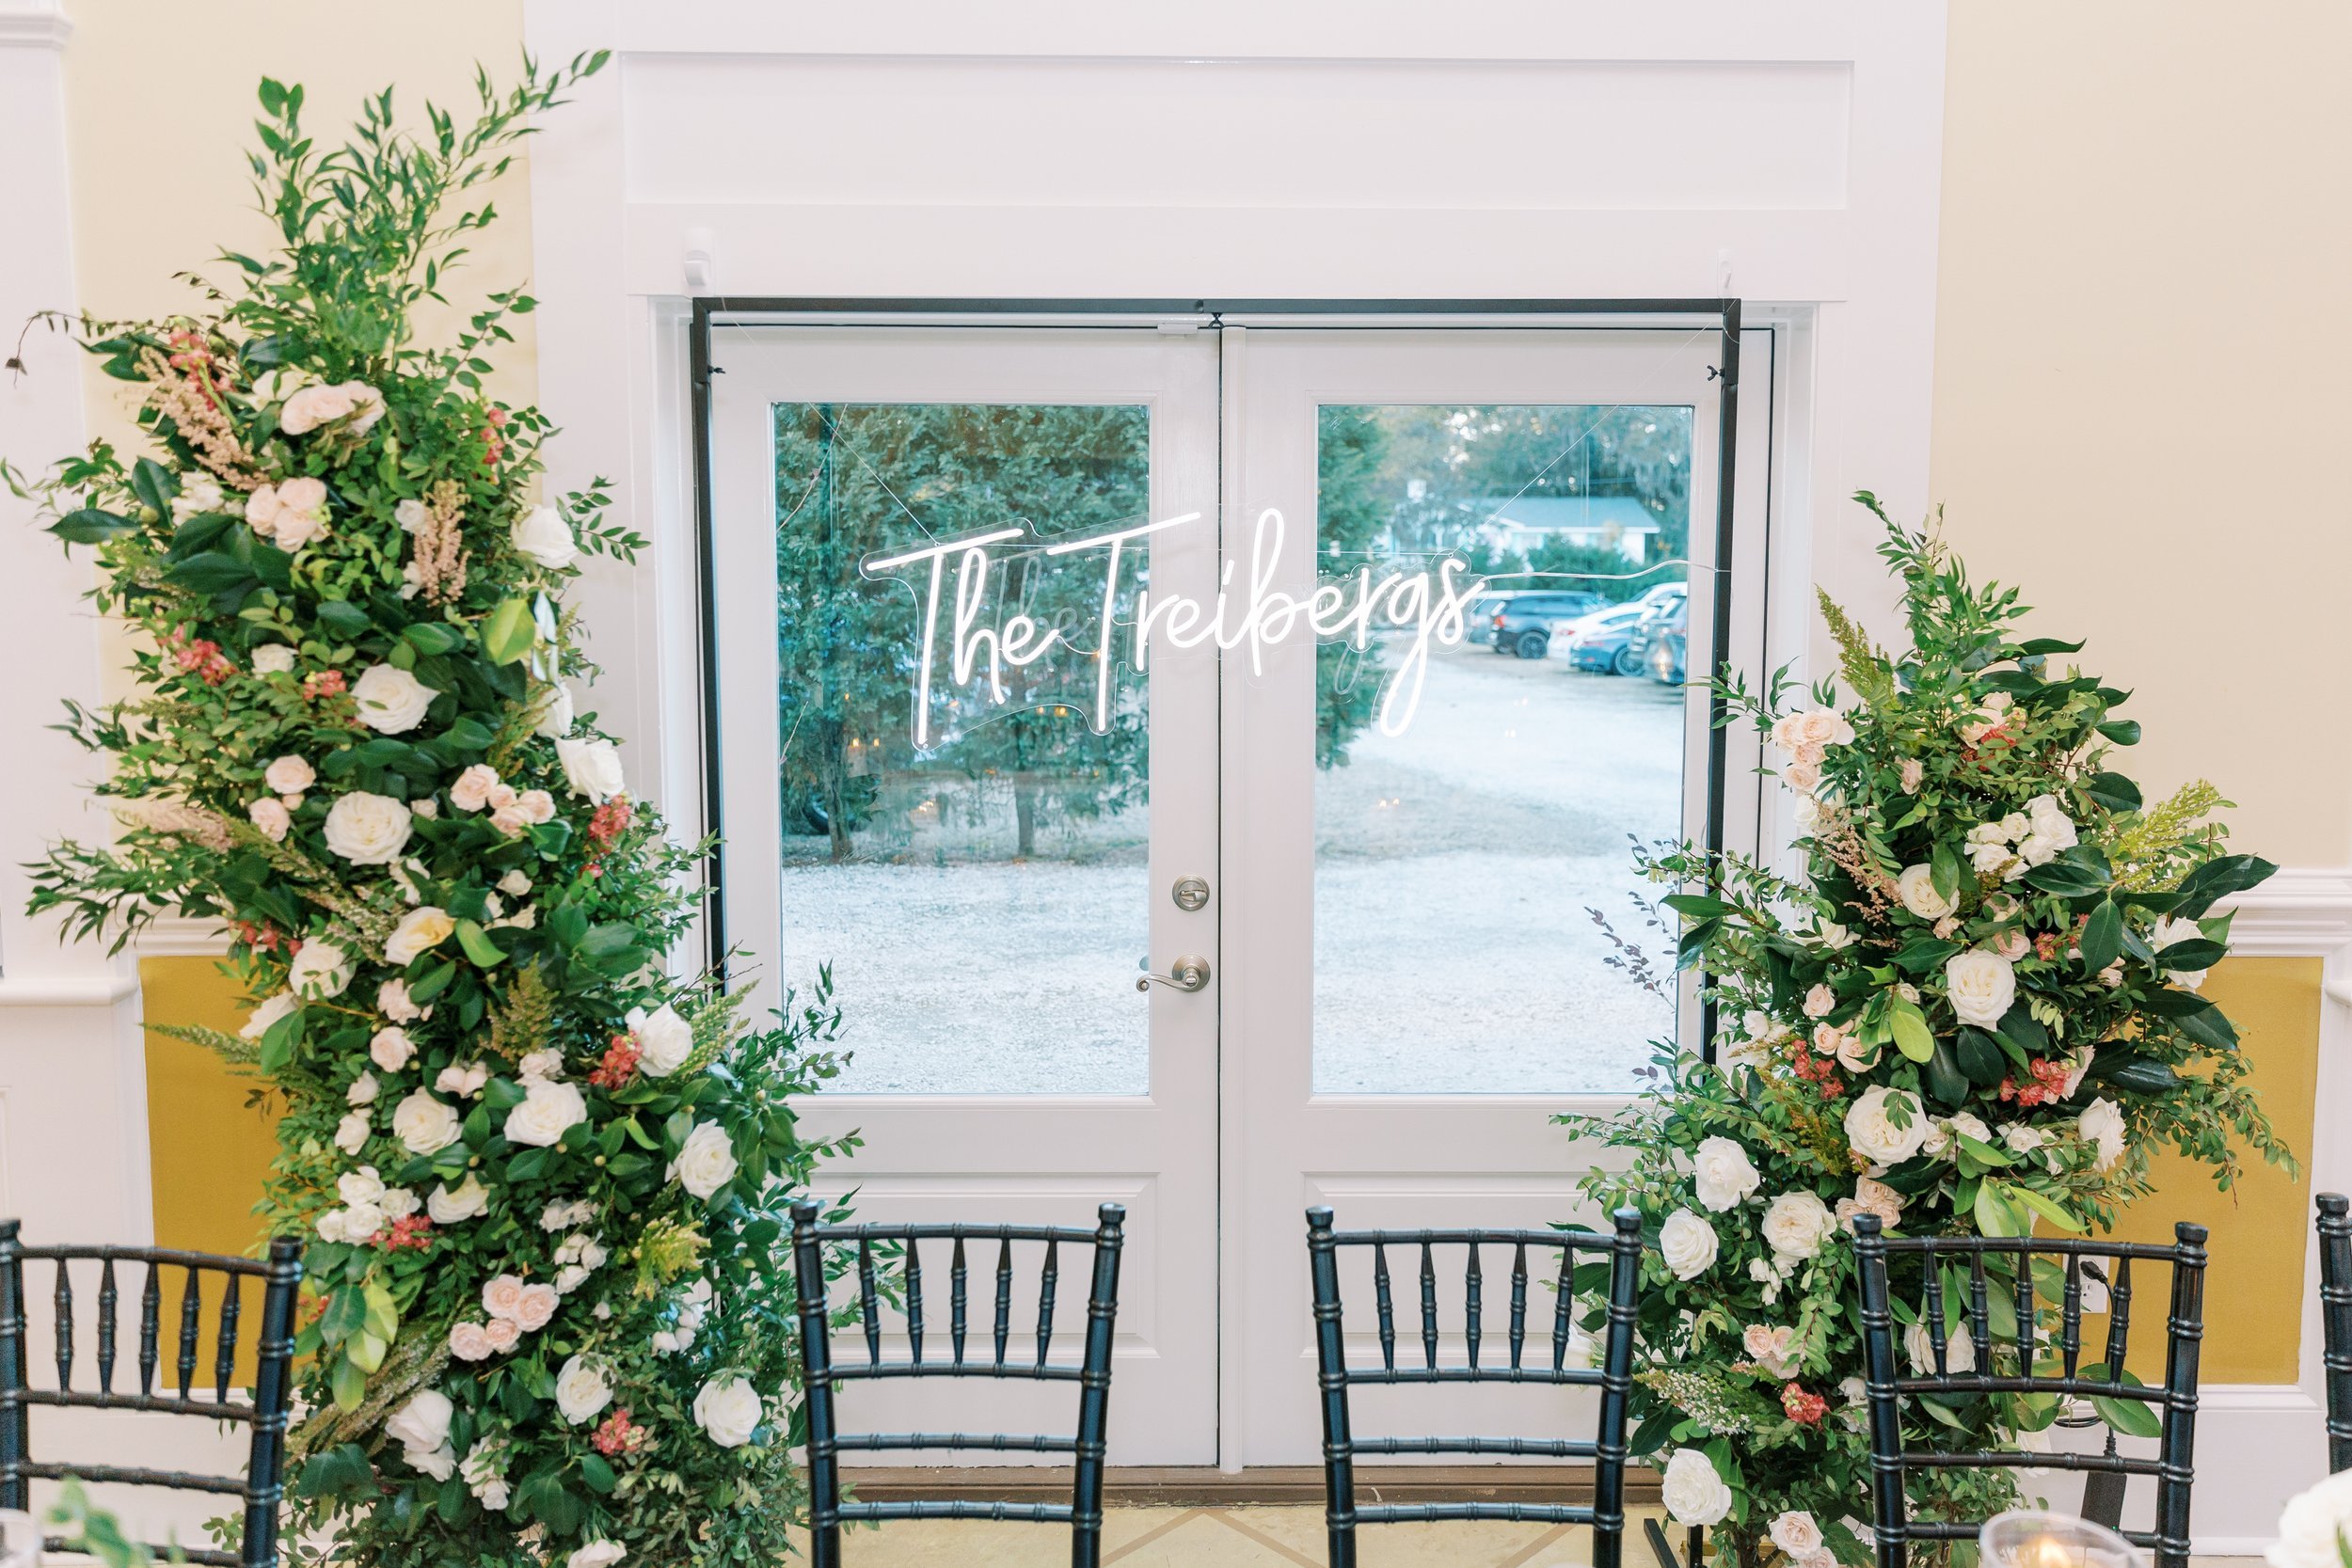 cheyenne-and-nicks-wedding-at-the-tybee-island-wedding-chapel-planned-by-savannah-wedding-planner-ivory-and-beau-with-sottero-and-midgley-gown-from-savannah-bridal-shop-and-wedding-florals-from-savannah-florist-20.jpg